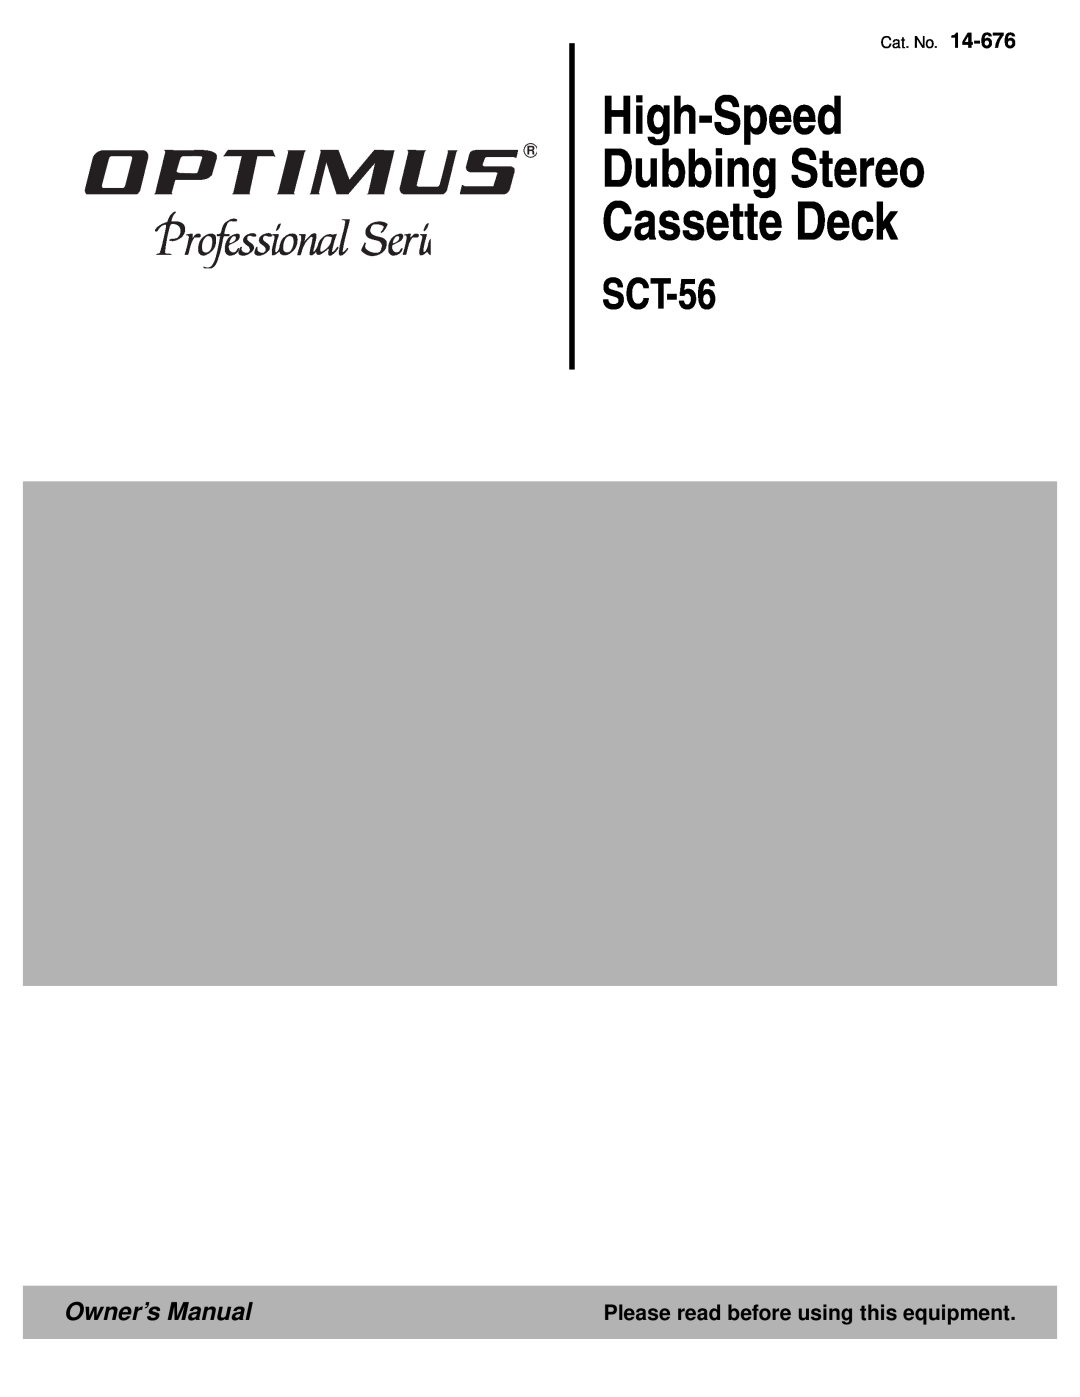 Optimus SCT-56 owner manual Please read before using this equipment, High-Speed Dubbing Stereo Cassette Deck 